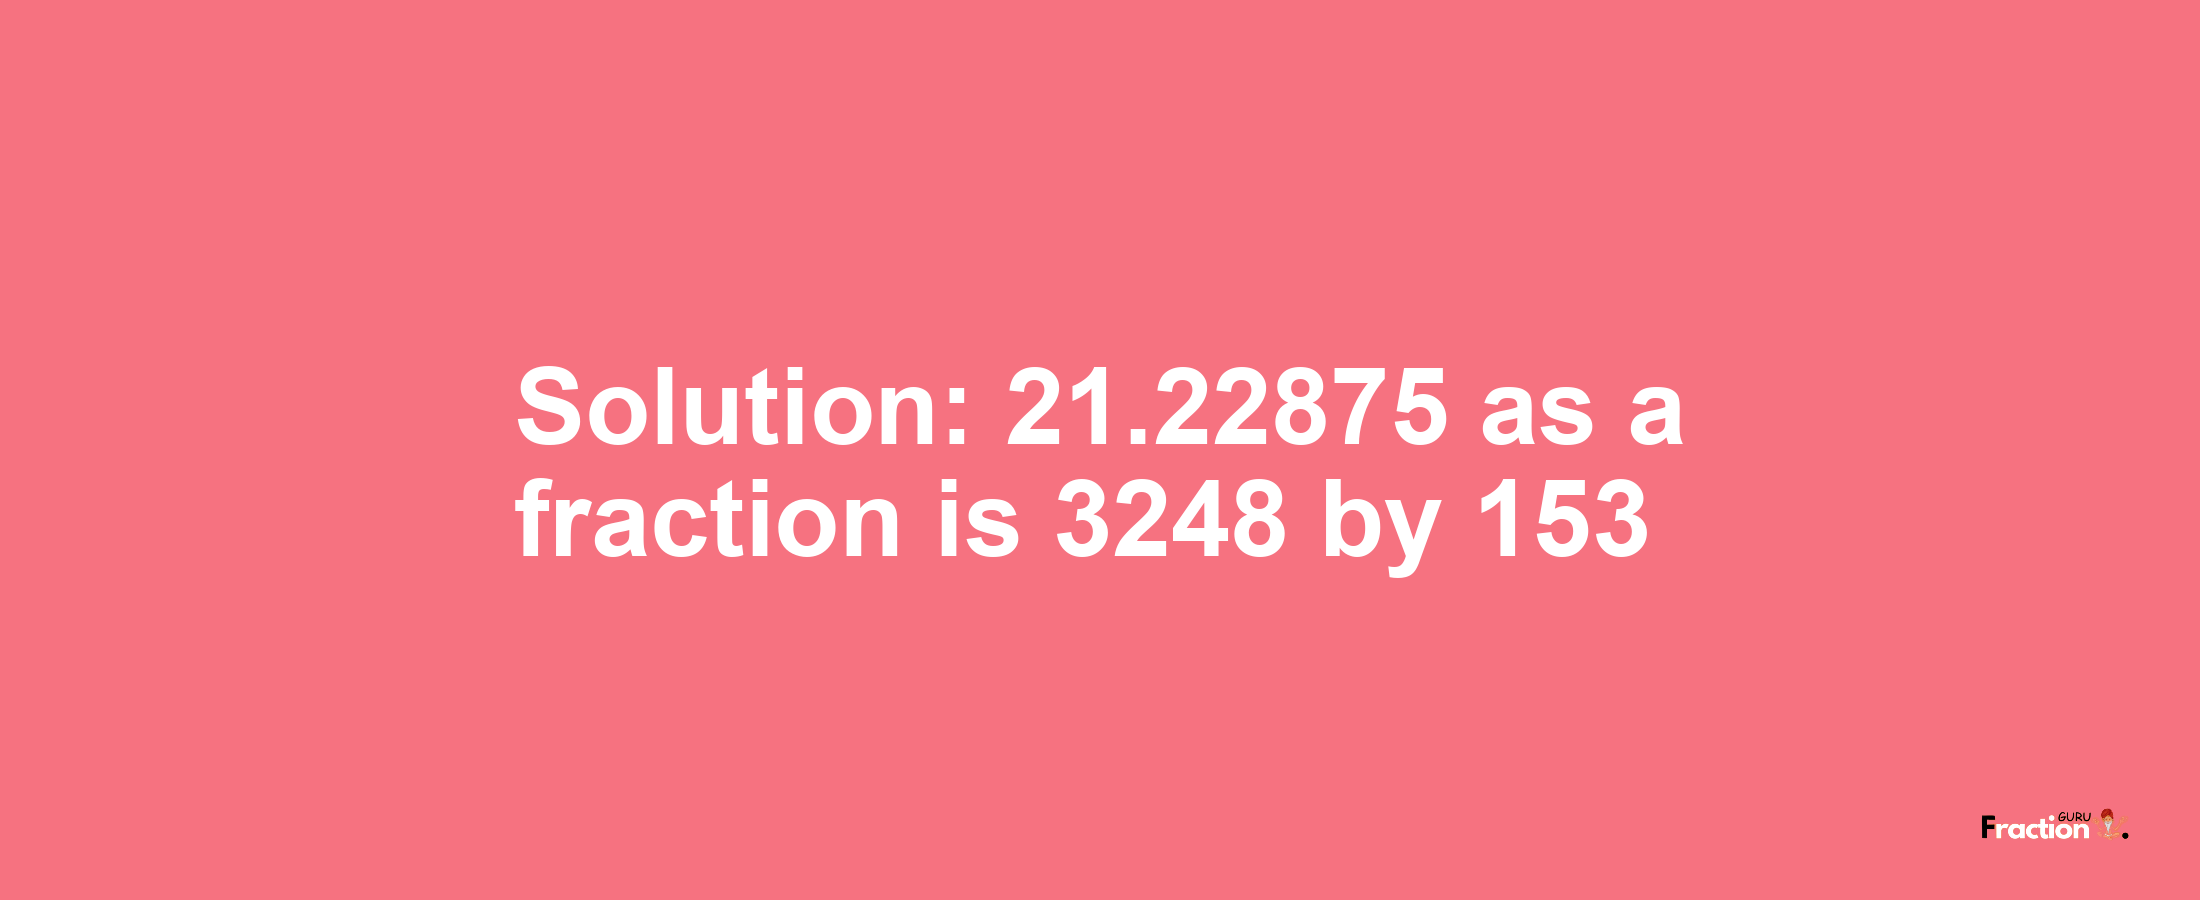 Solution:21.22875 as a fraction is 3248/153